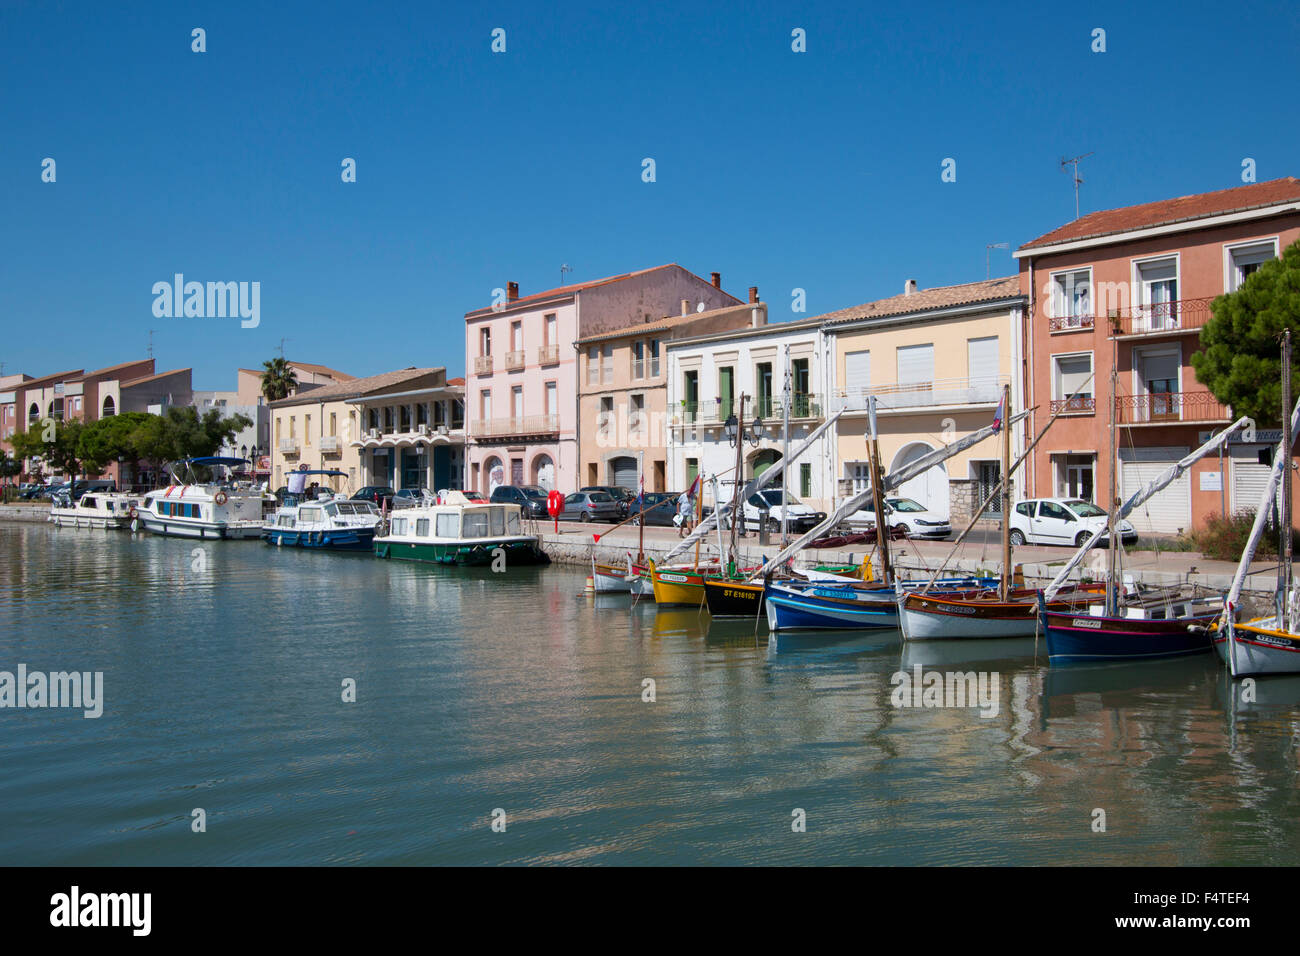 France, Europe, Frontignan, Languedoc-Roussillon, Herault, Quai, canal, waterway, boats, Stock Photo